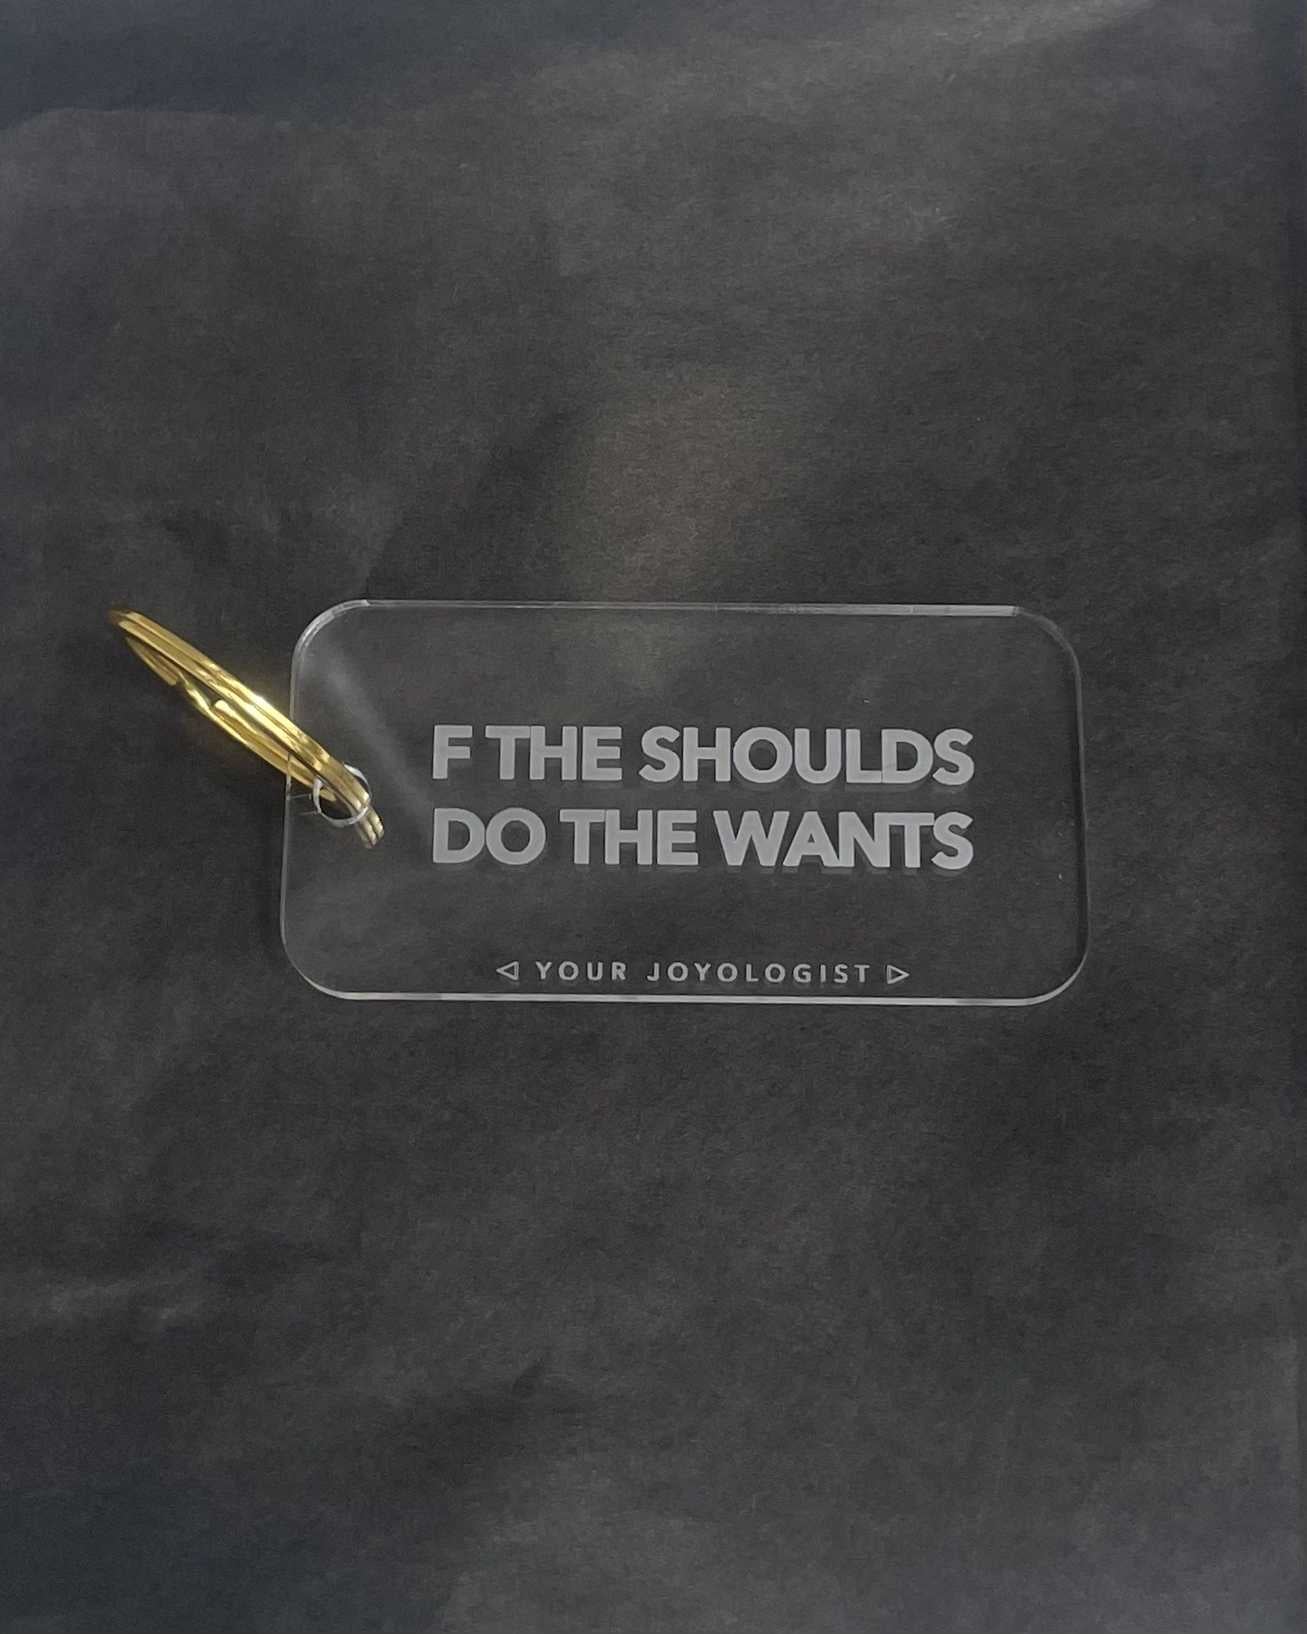 F the Shoulds. Do the Wants. - keychain Your Joyologist